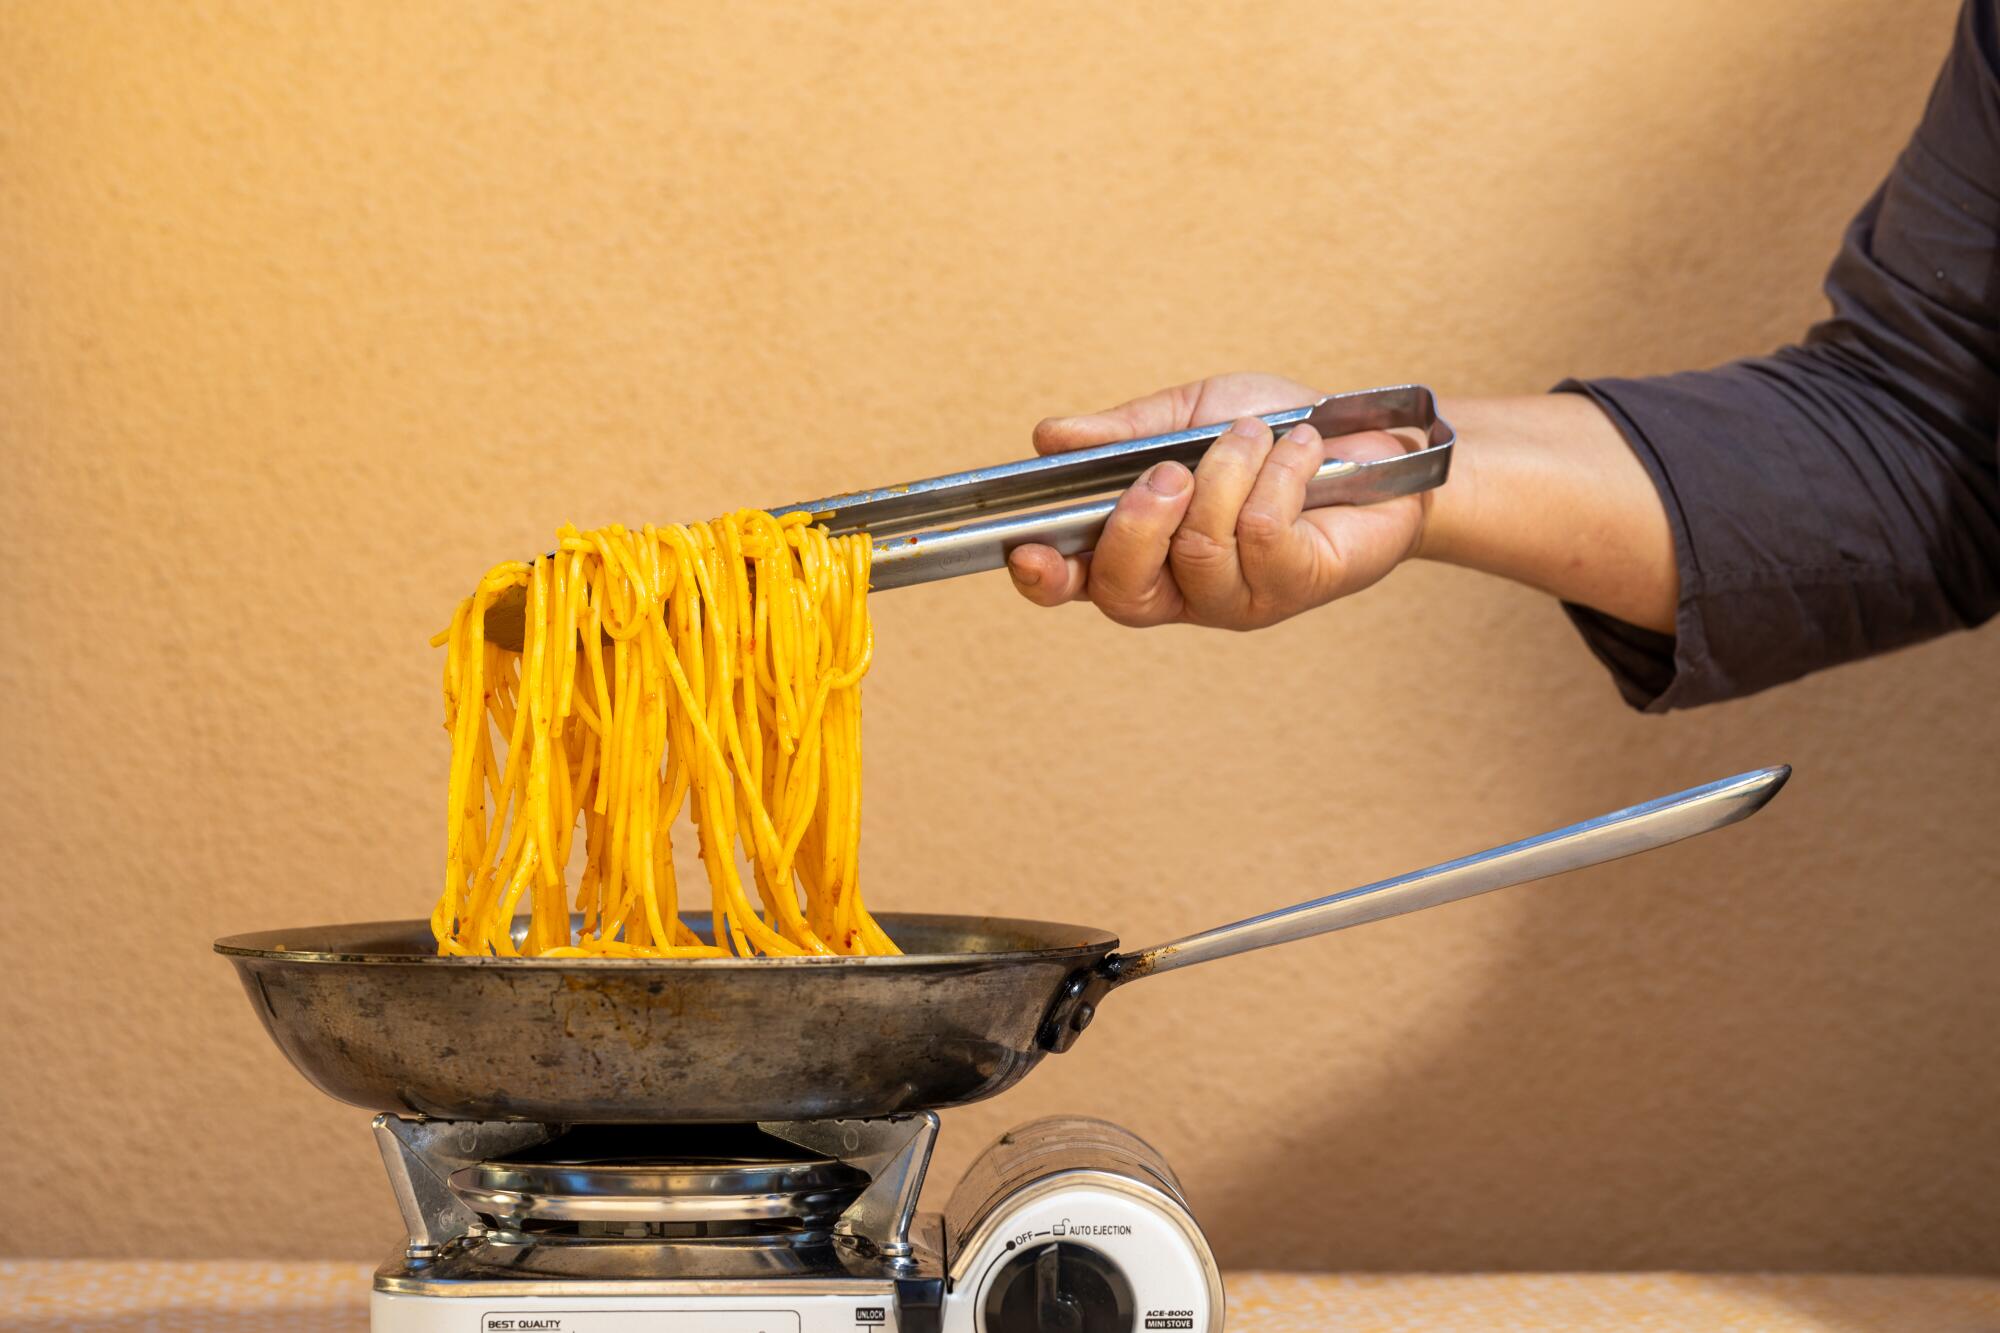 An arm reaching out and pulling spaghetti out of a pan.